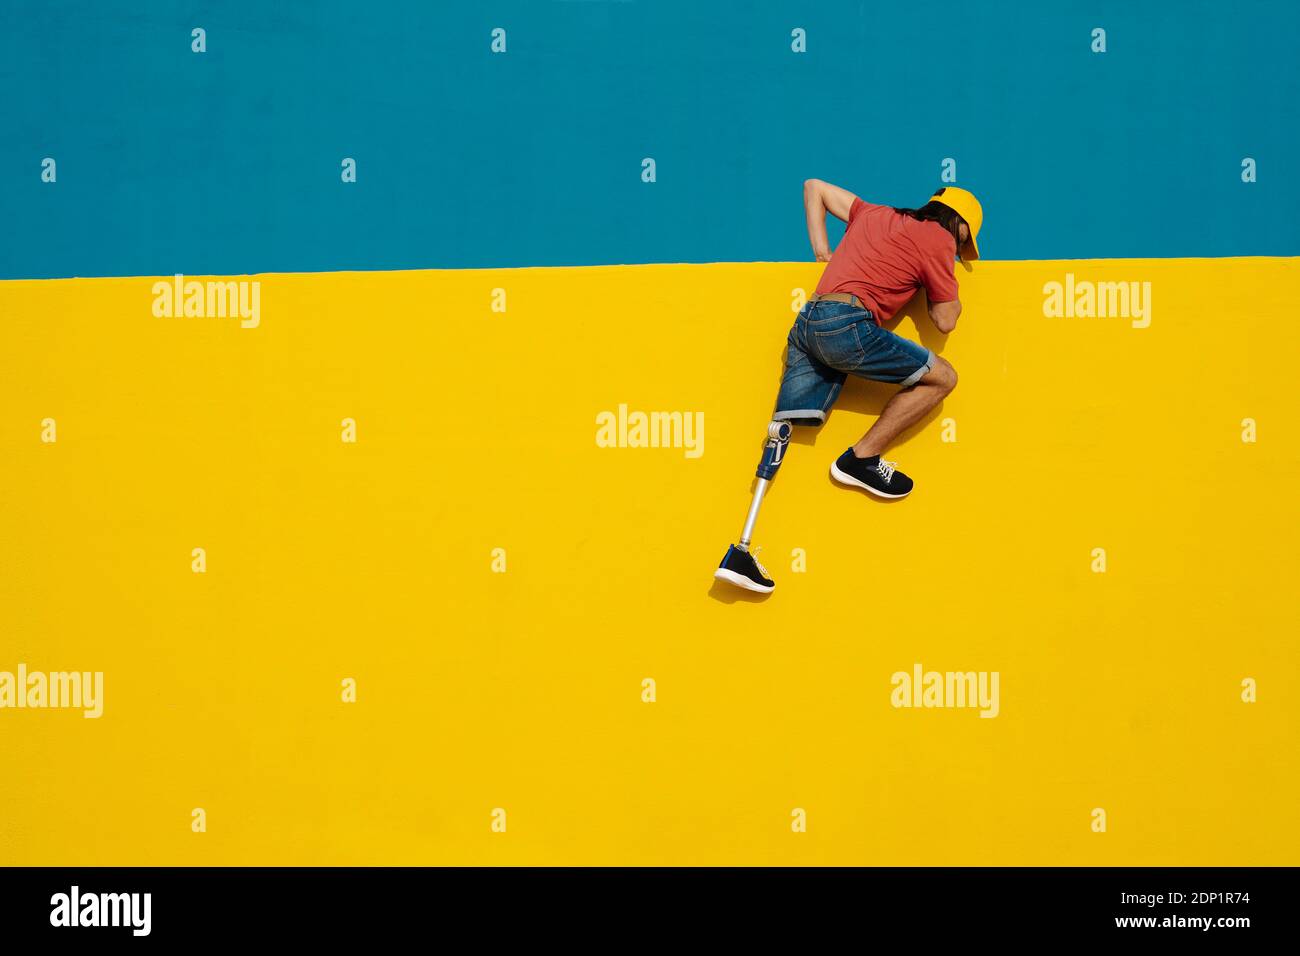 Disabled athlete putting efforts to climb multi colored wall Stock Photo